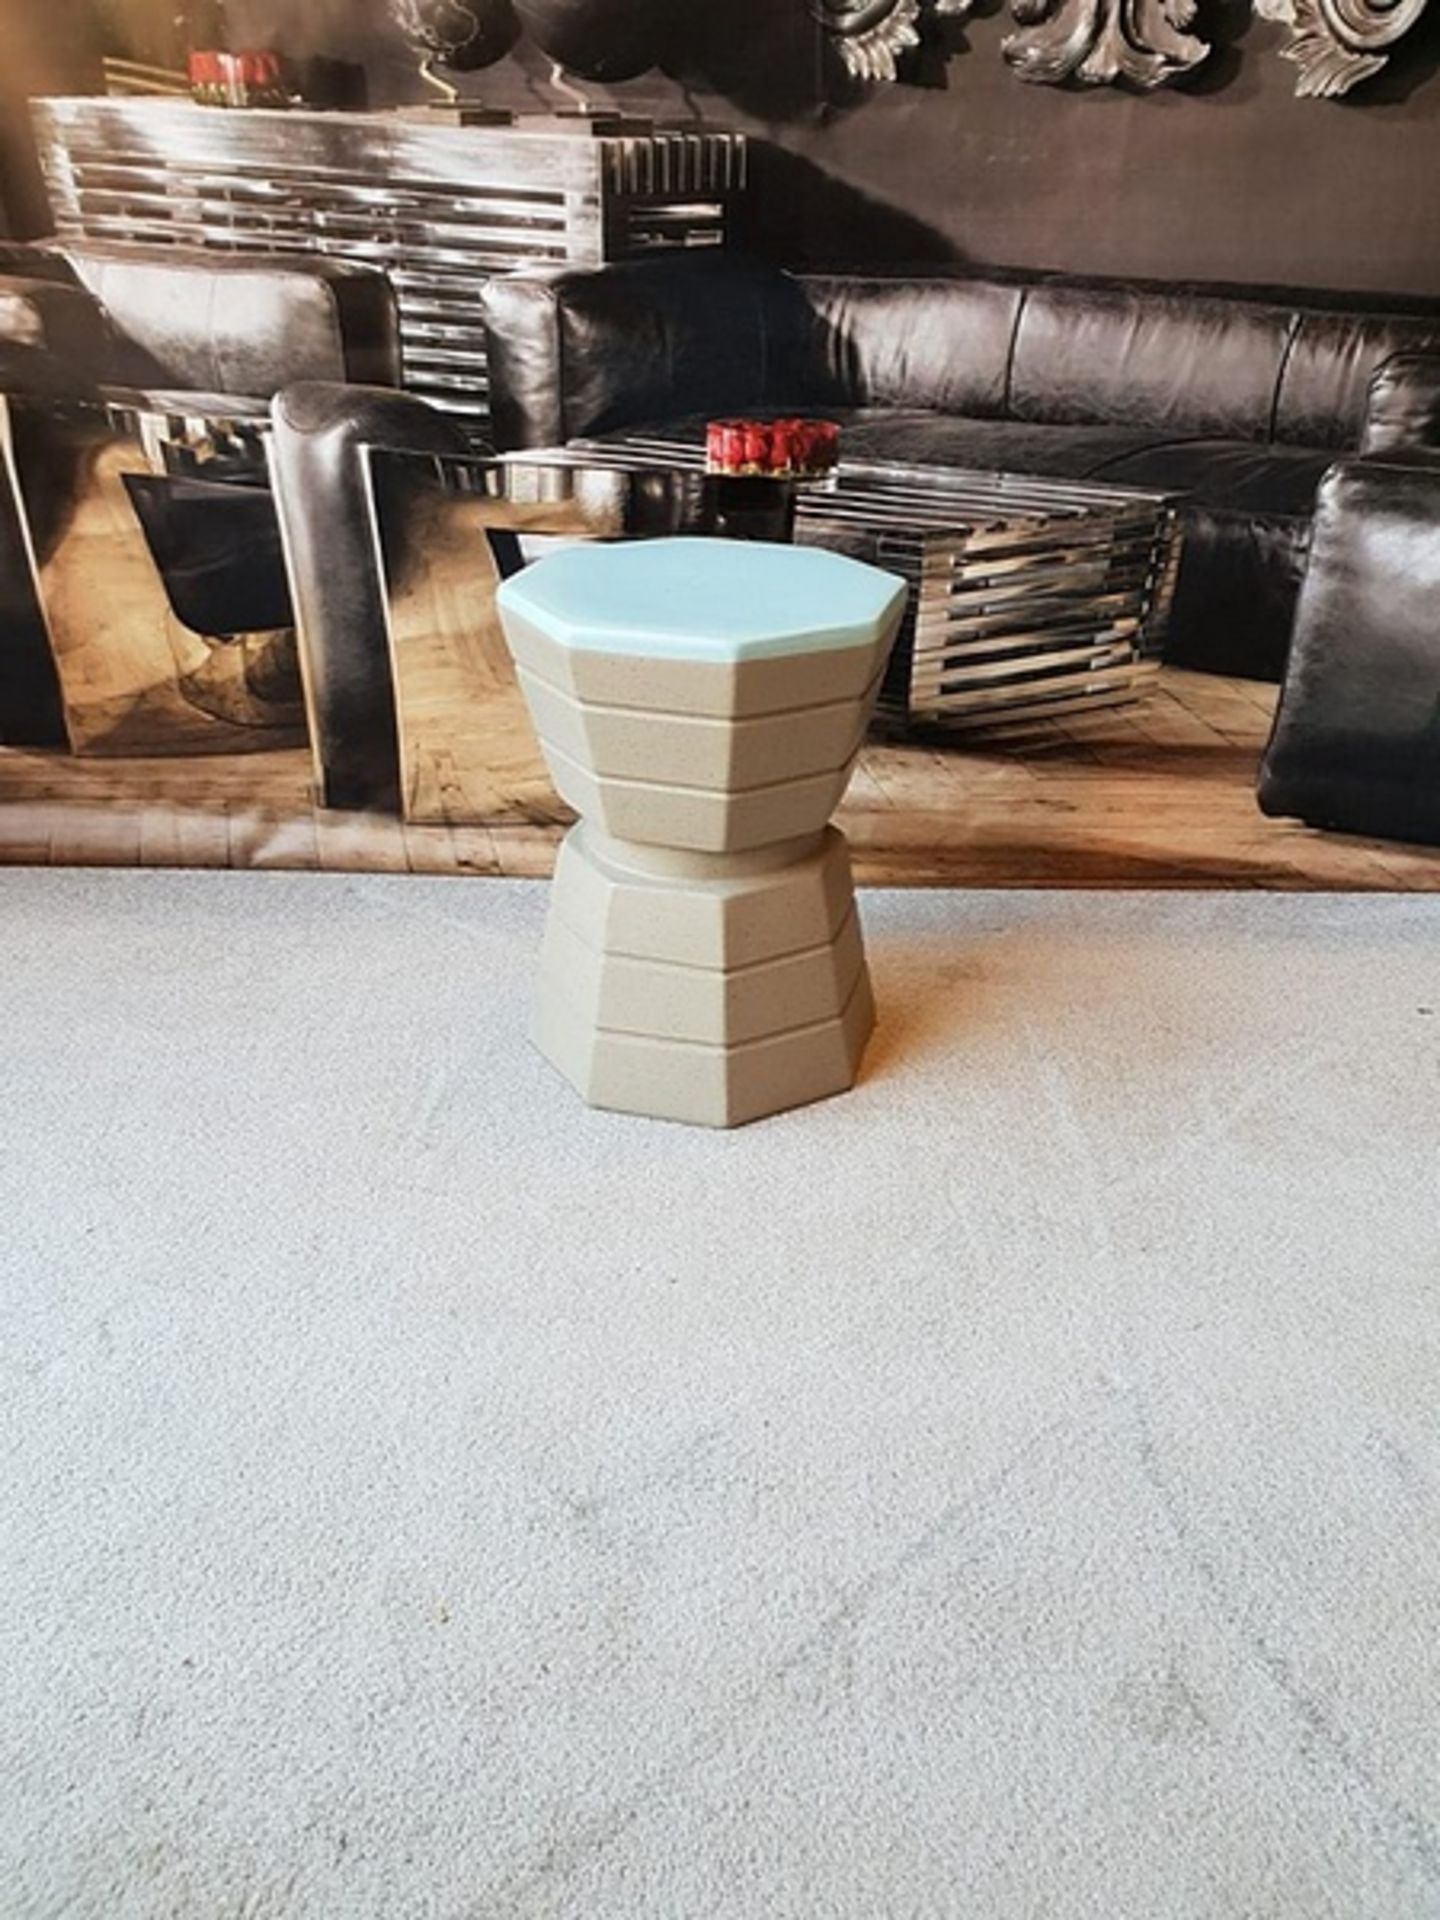 Stool - Tracey Boyd Concrete Barrista Stool Blue Top 40 x 56cm MSRP £174